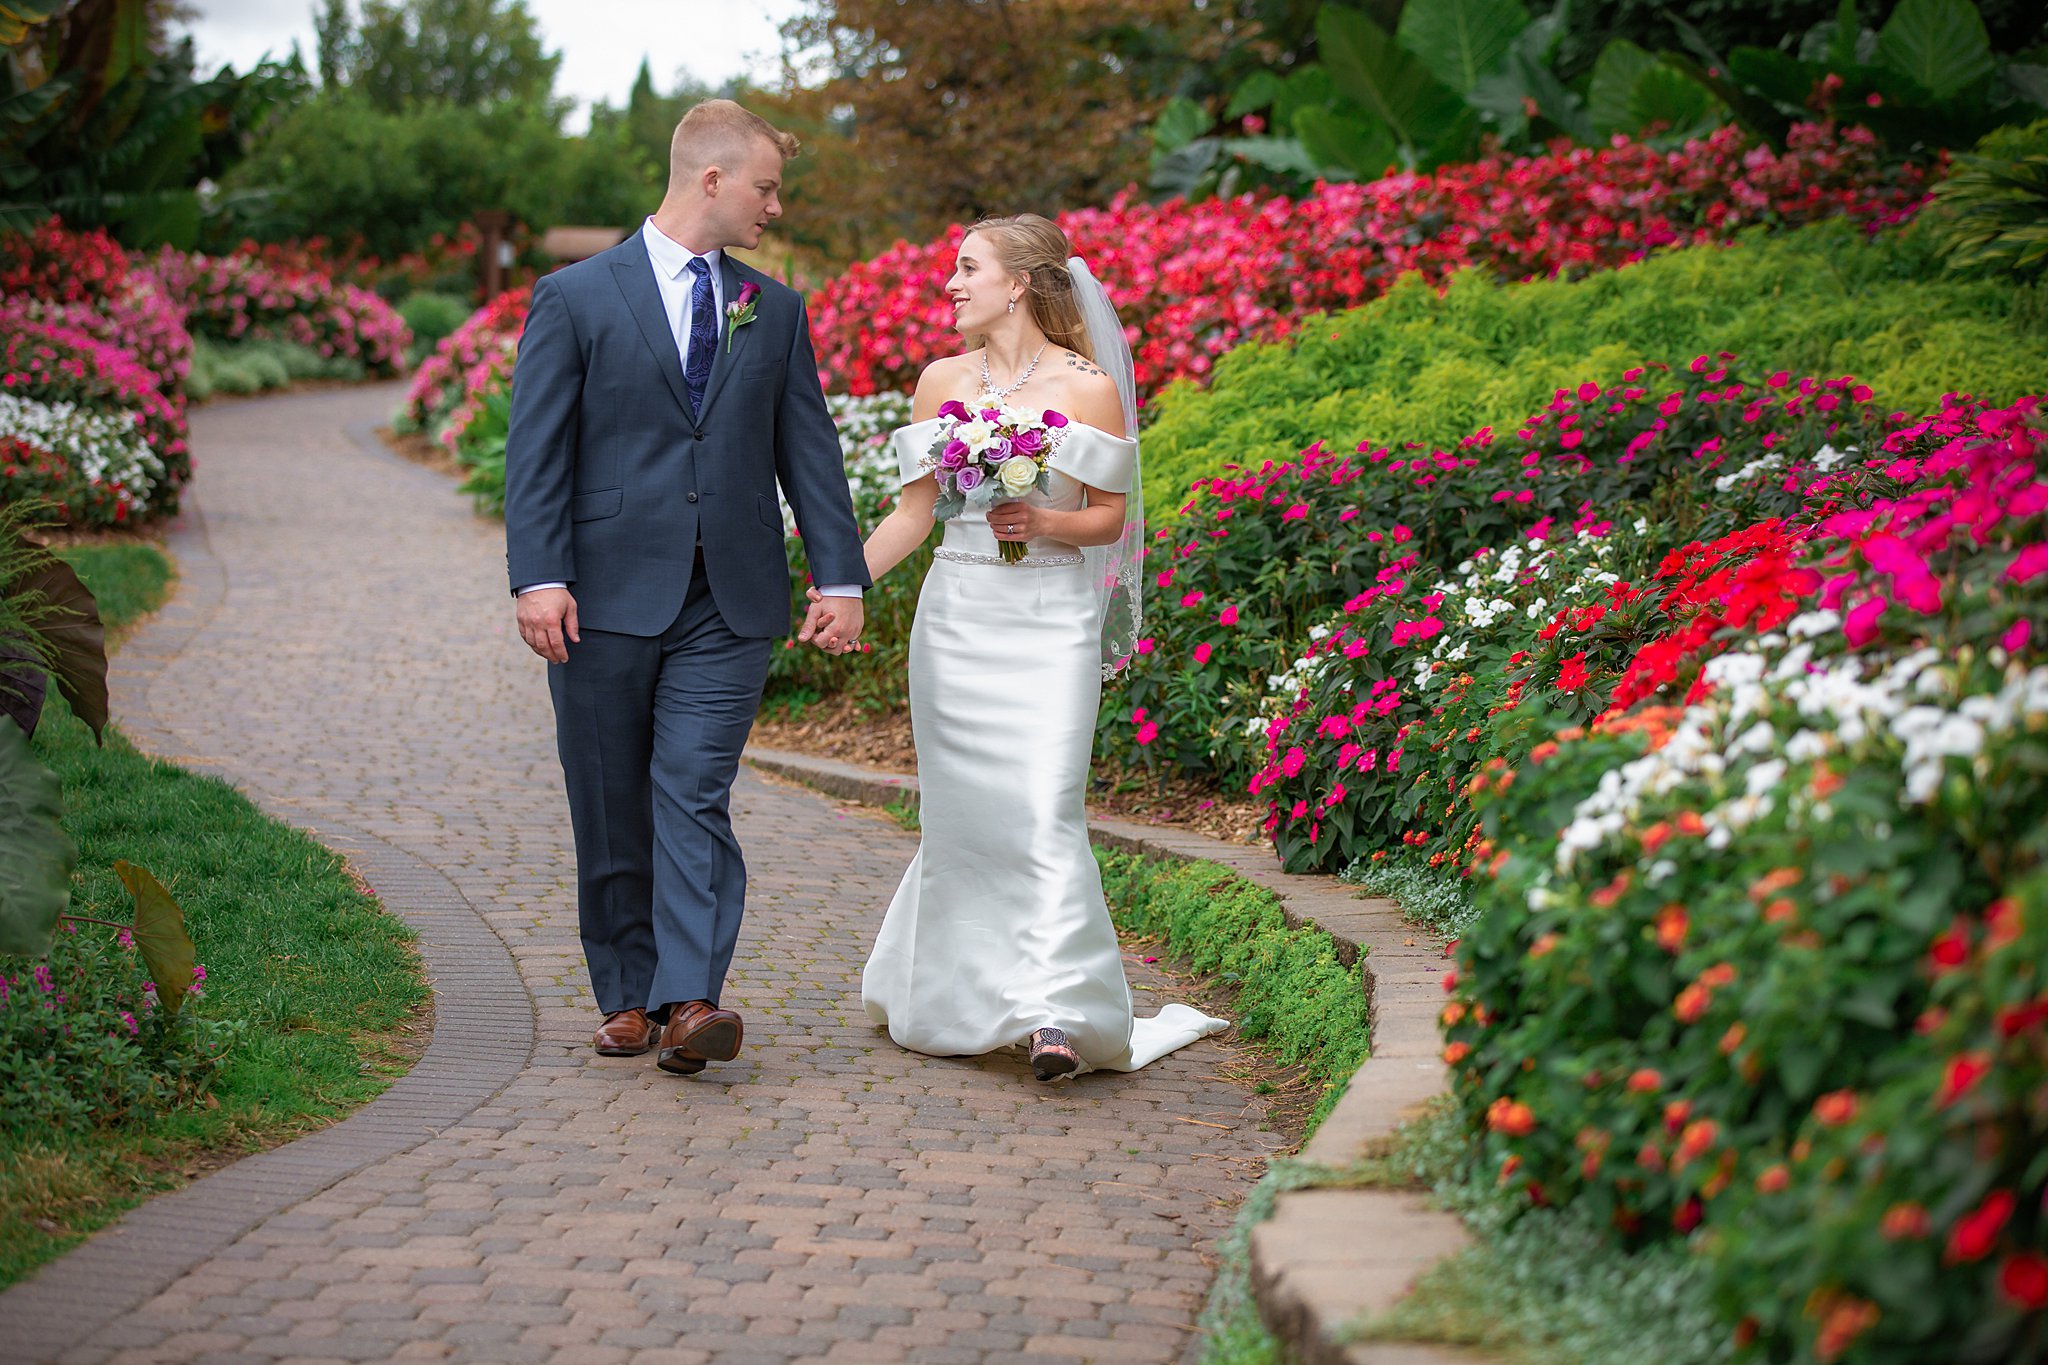 A newlywed couple holds hands while walking through a colorful flower garden path in a blue suit and silk wedding dress sunken gardens wedding lincoln ne